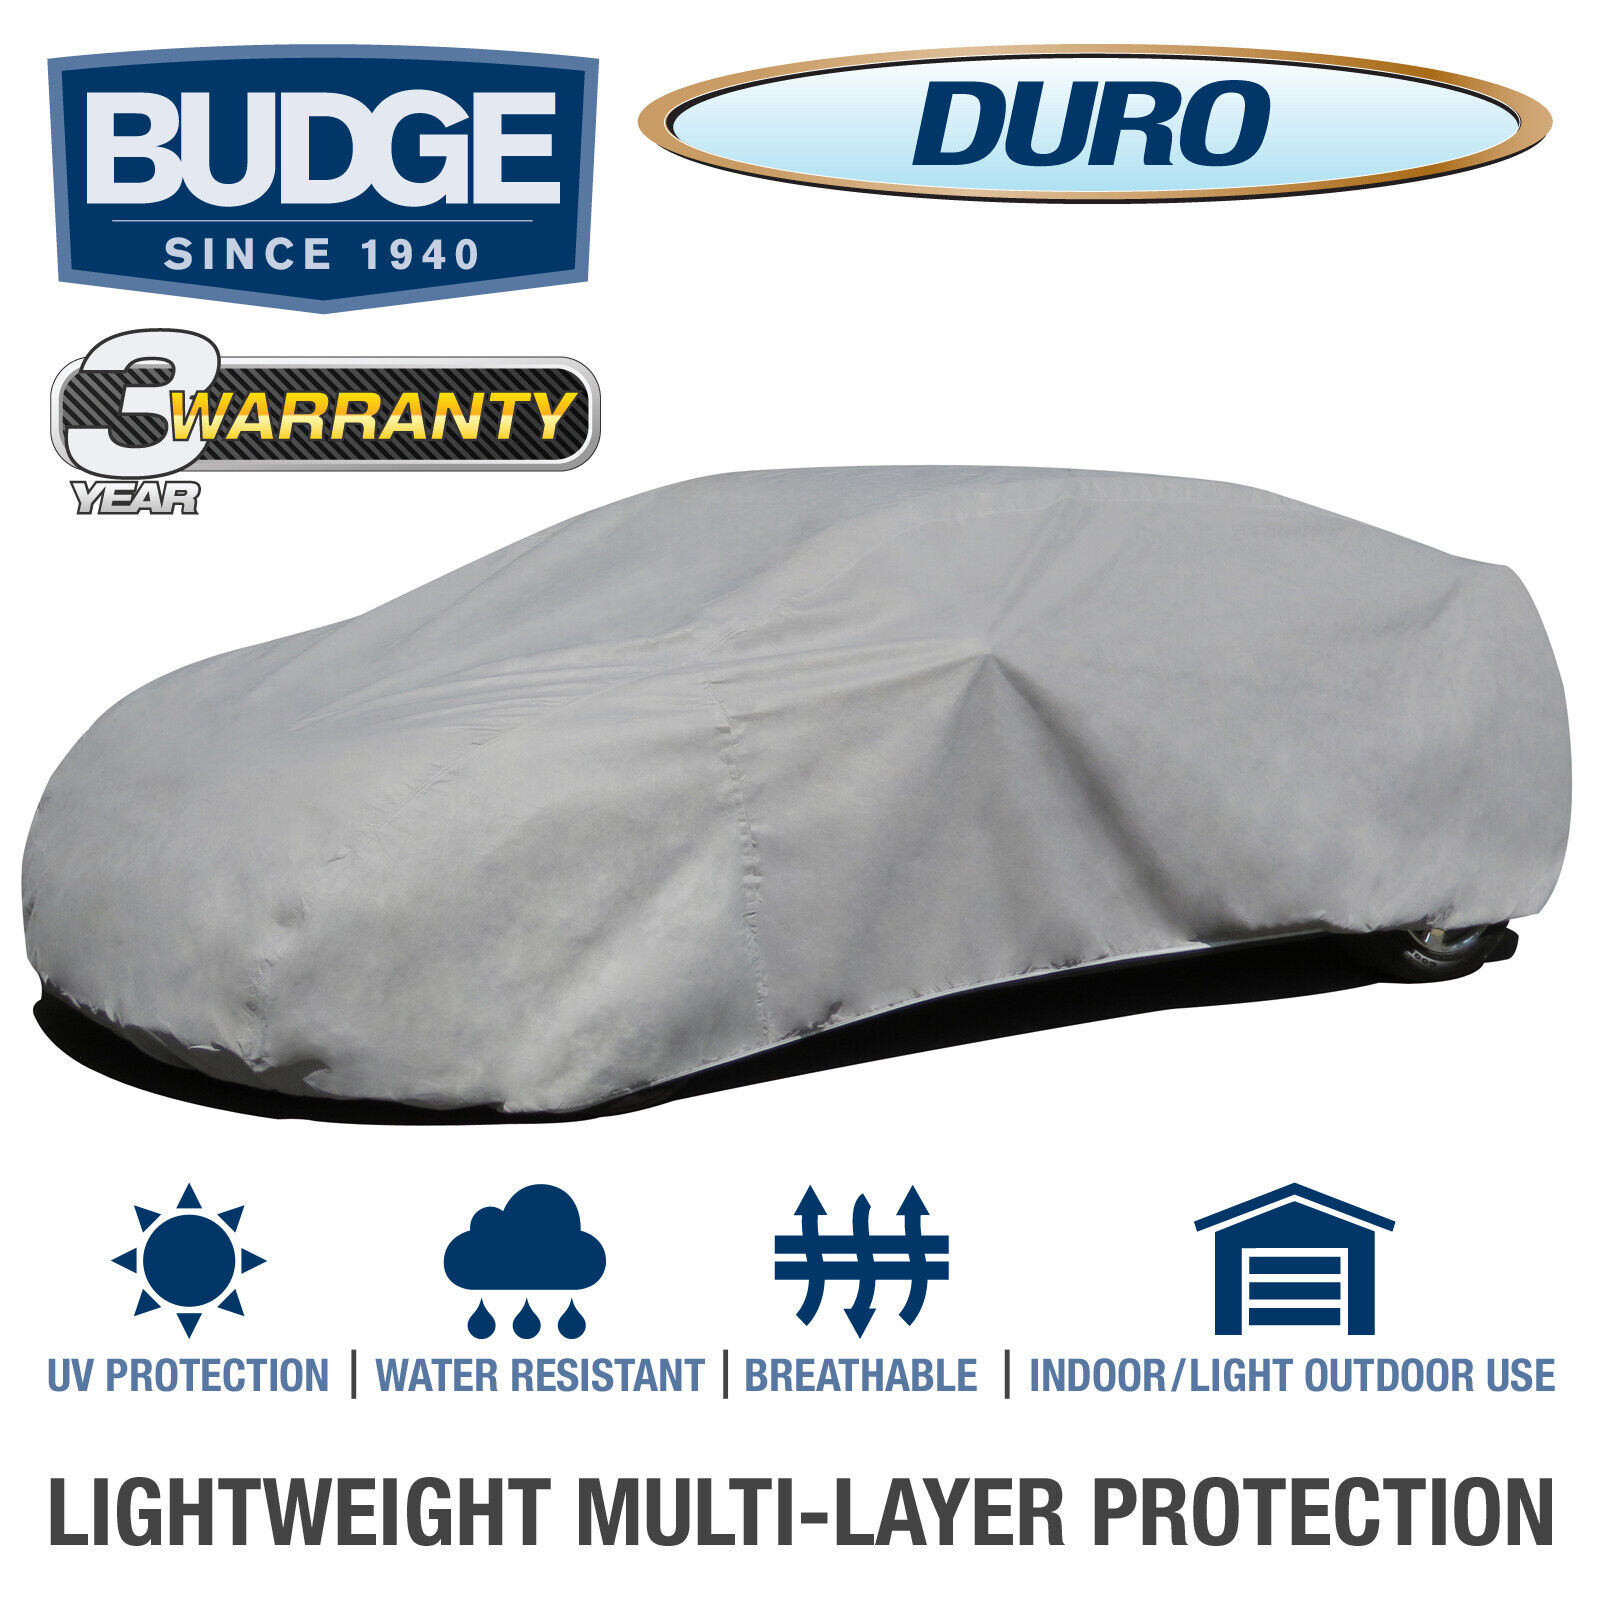 Budge Duro Car Cover Quantity limited New popularity Fits Toyota 2000 Breathable UV MR2 Protect